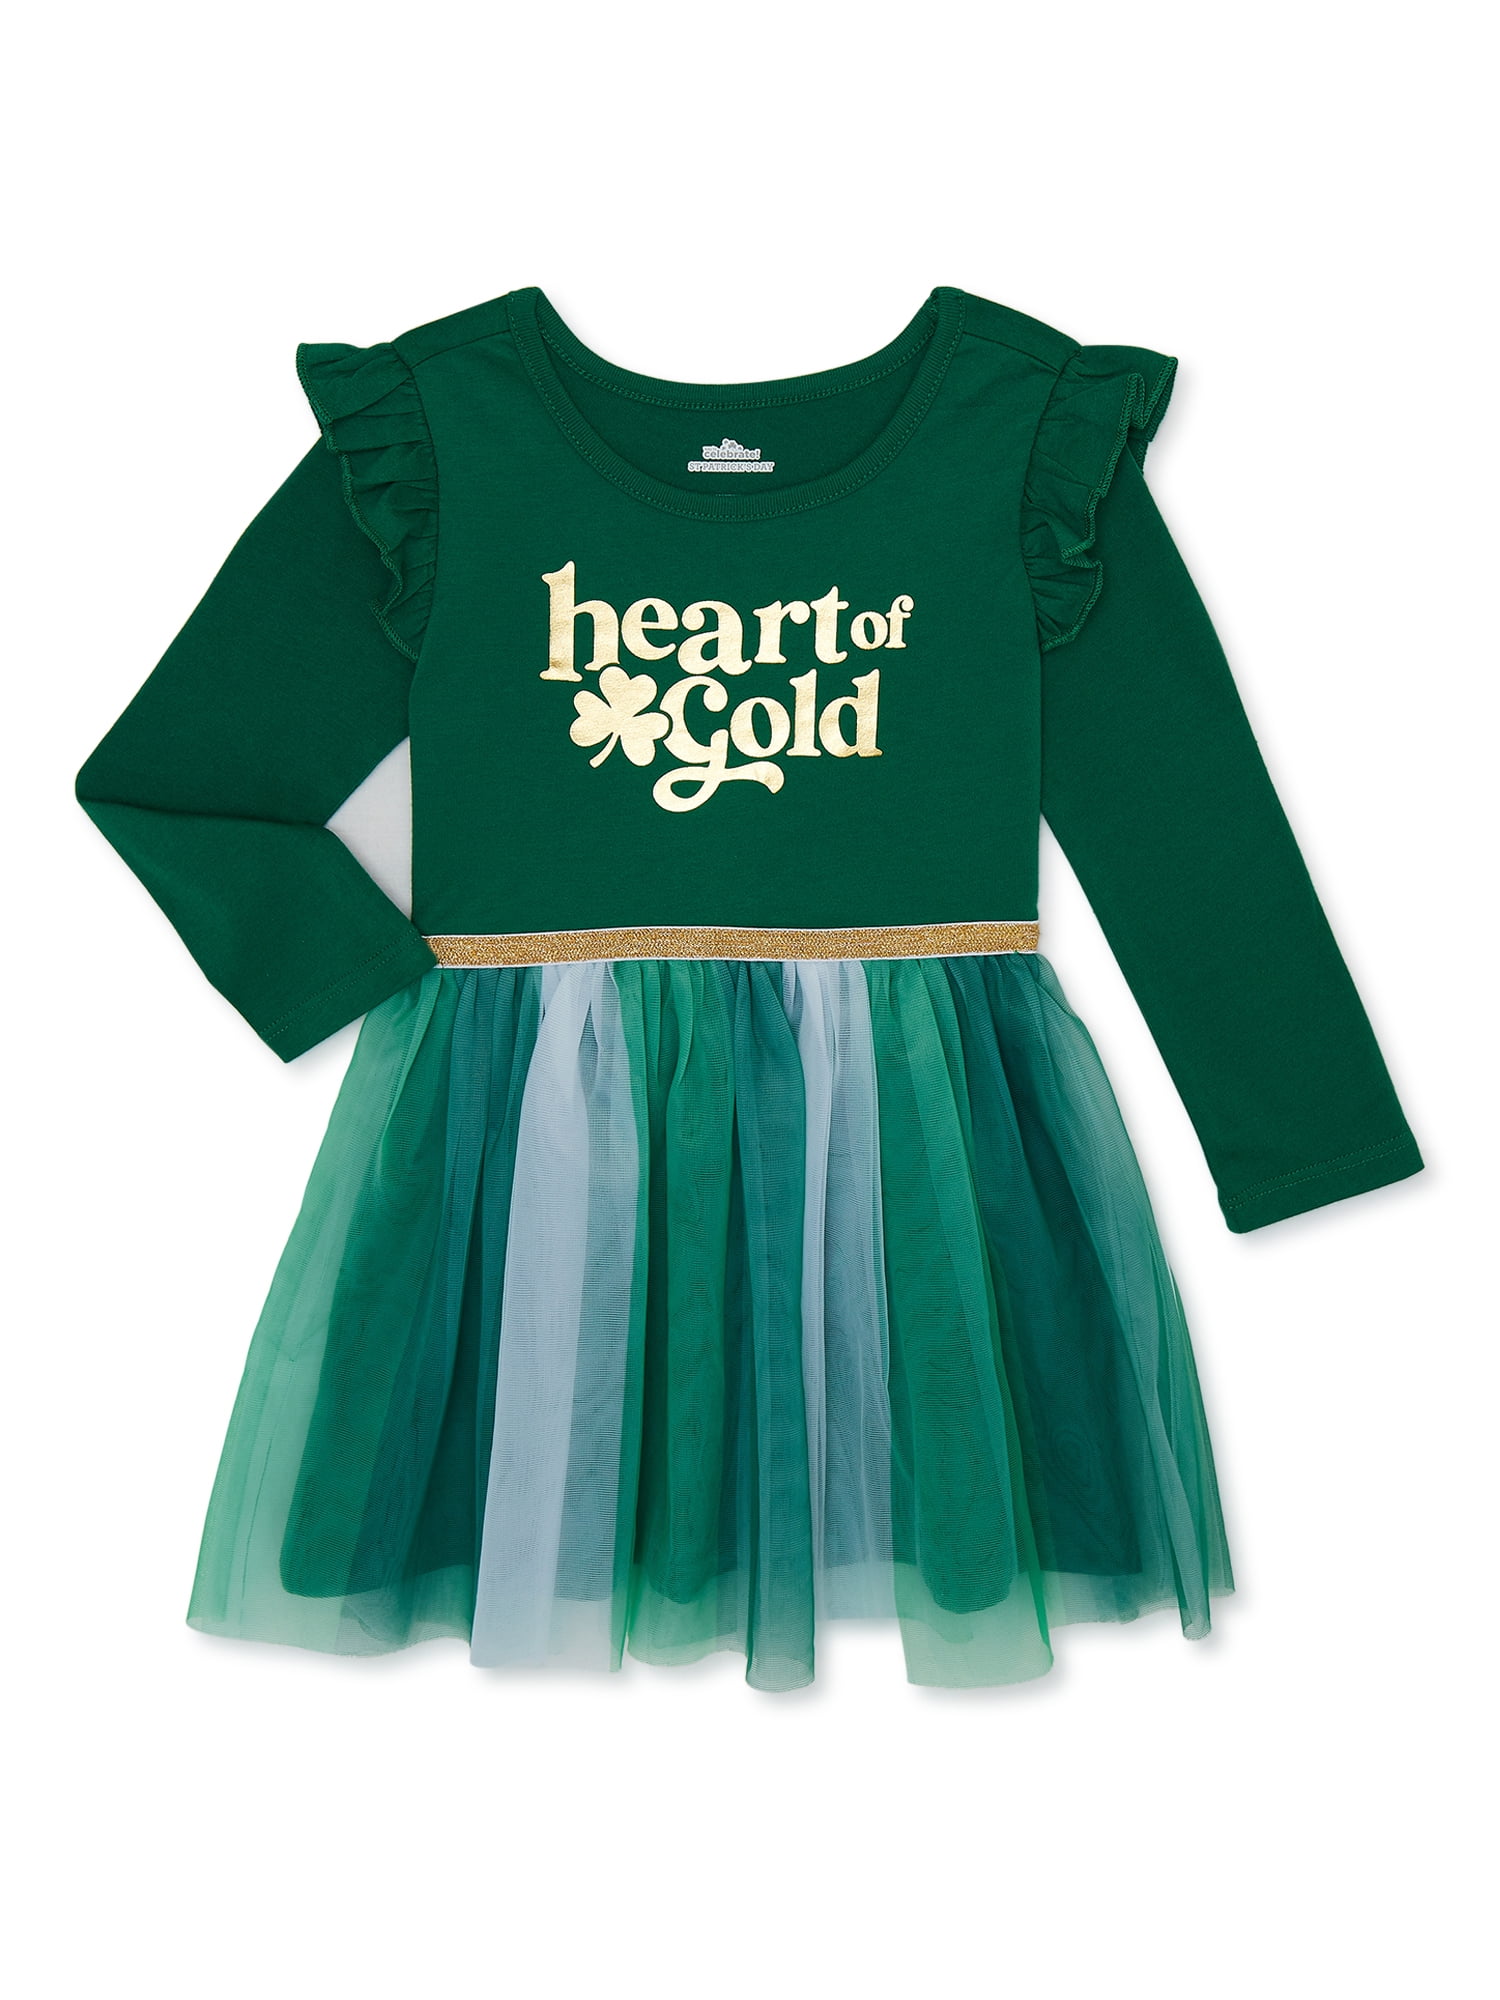 WAY TO CELEBRATE! St. Patrick's Day Baby and Toddler Girls Tutu Dress, Sizes 12M-5T